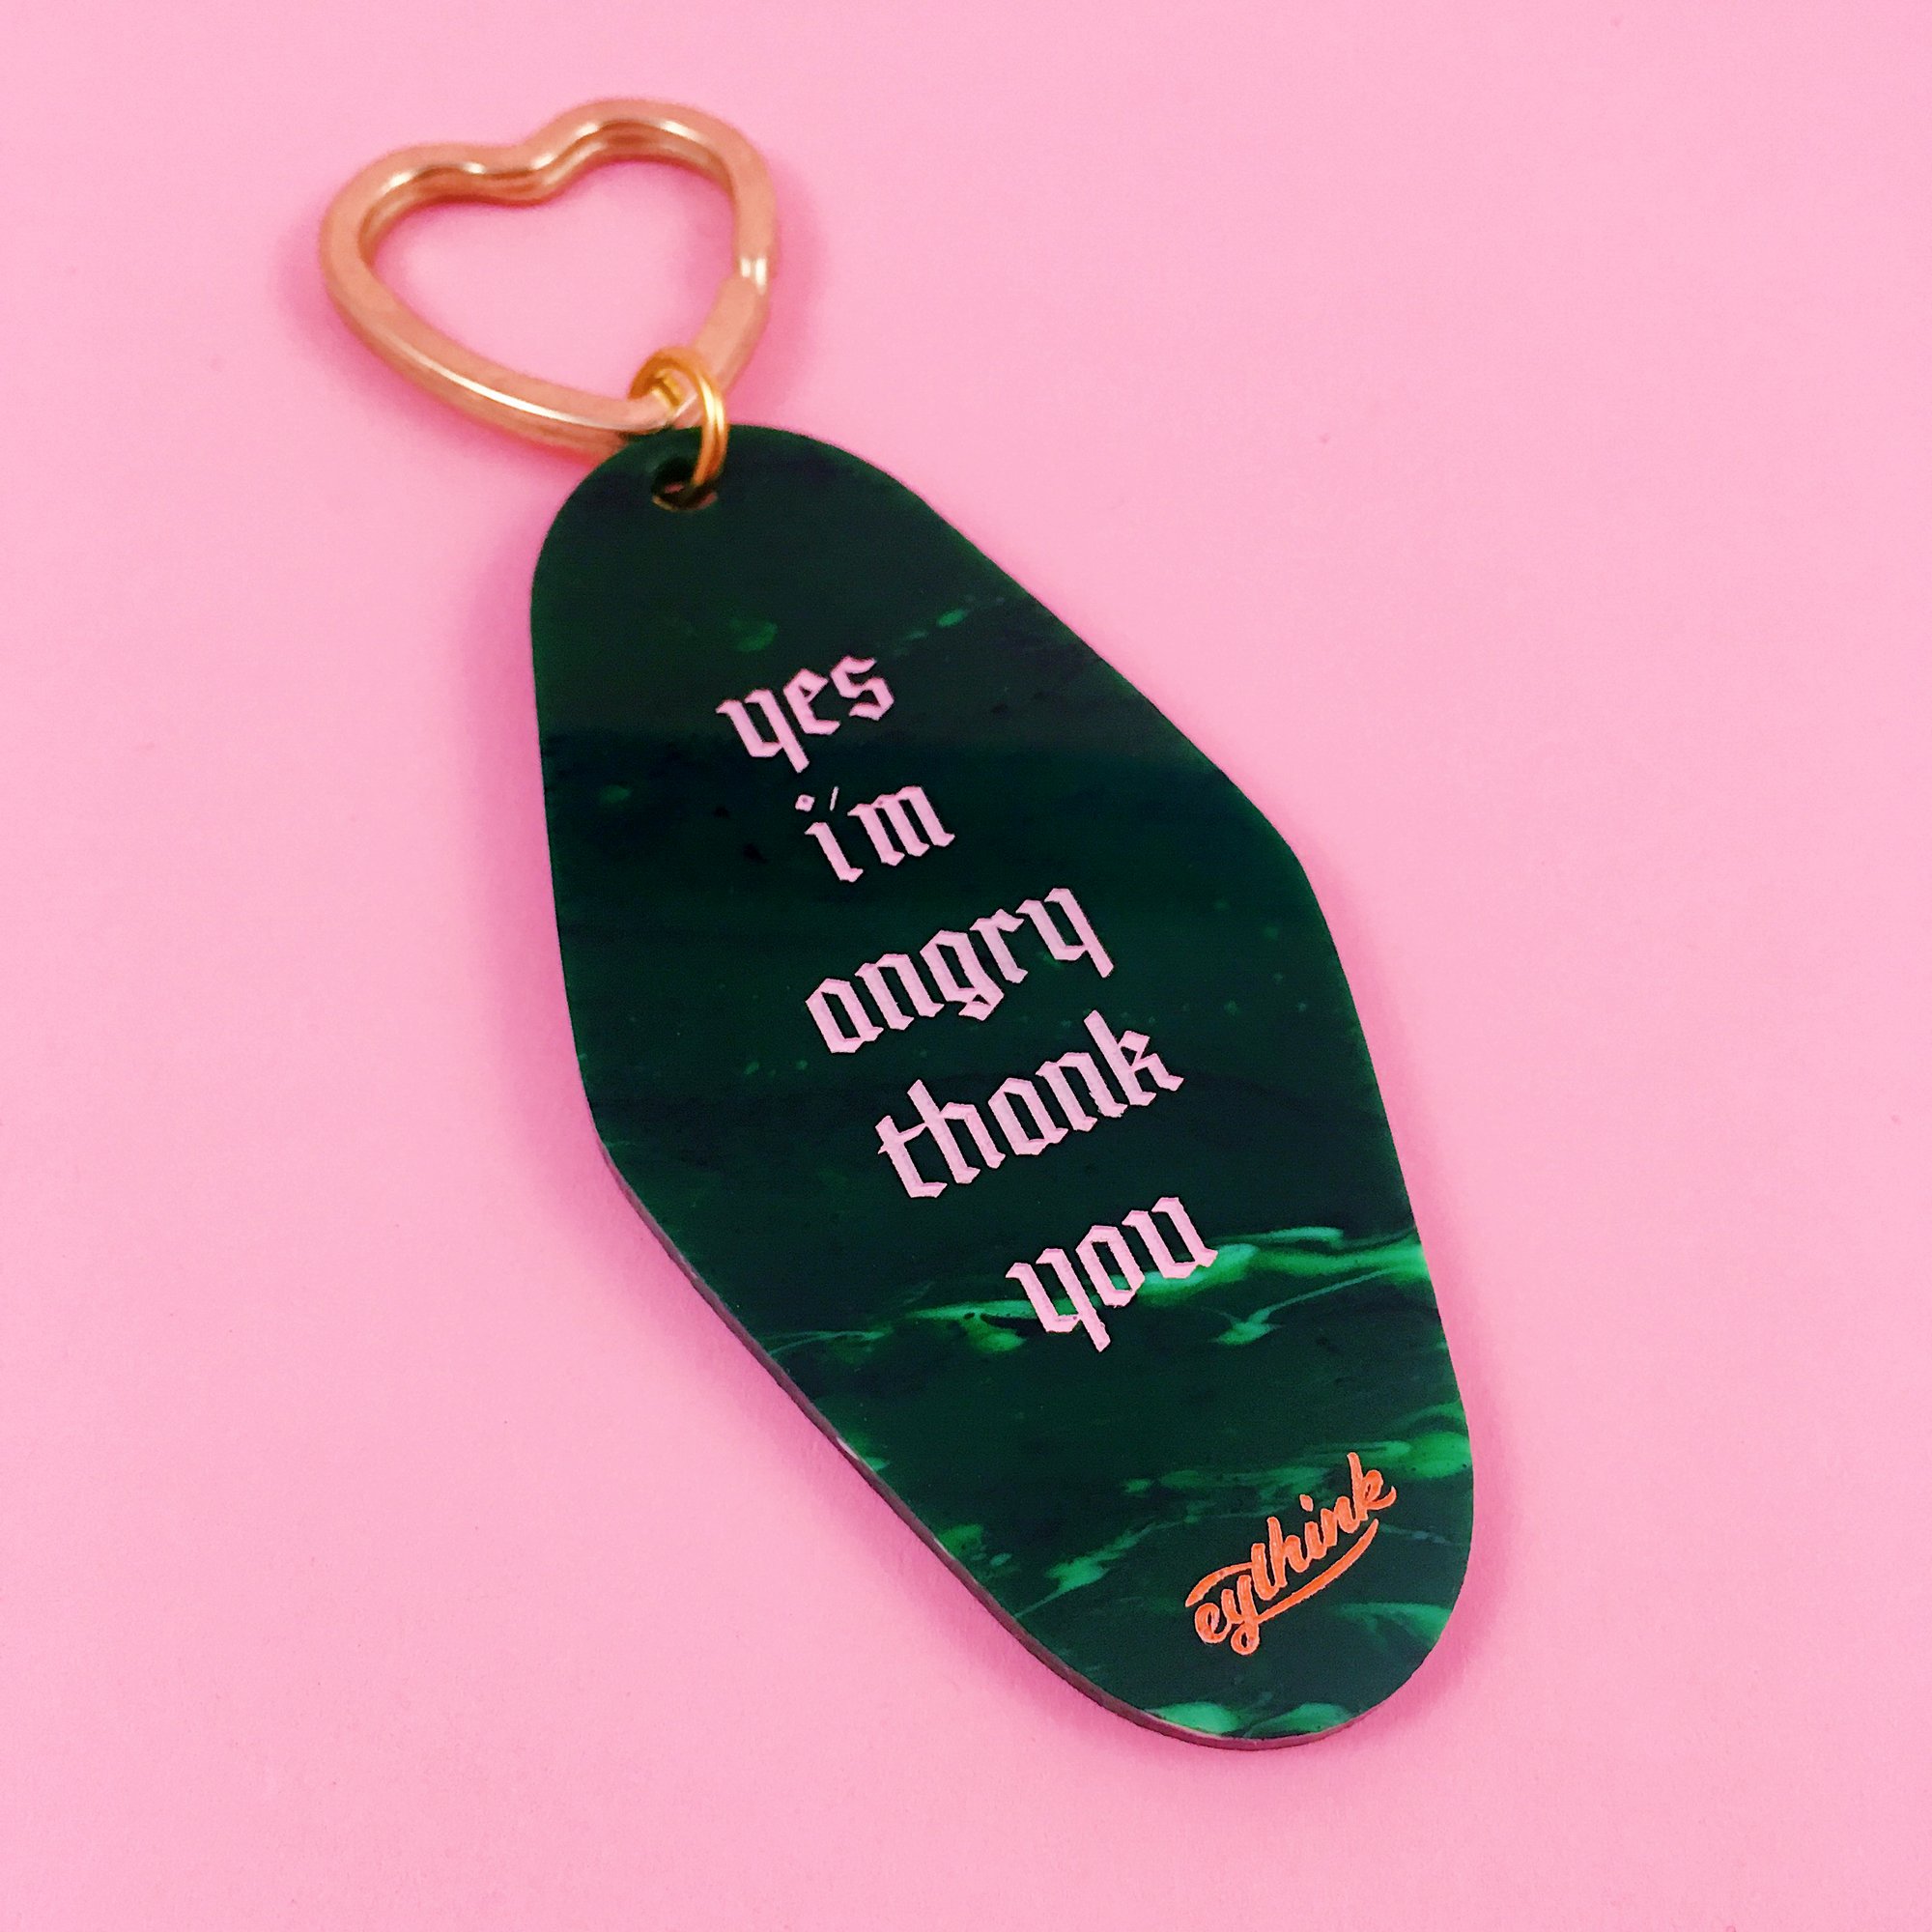 Image of Retired: Yes I’m Angry motel key tag